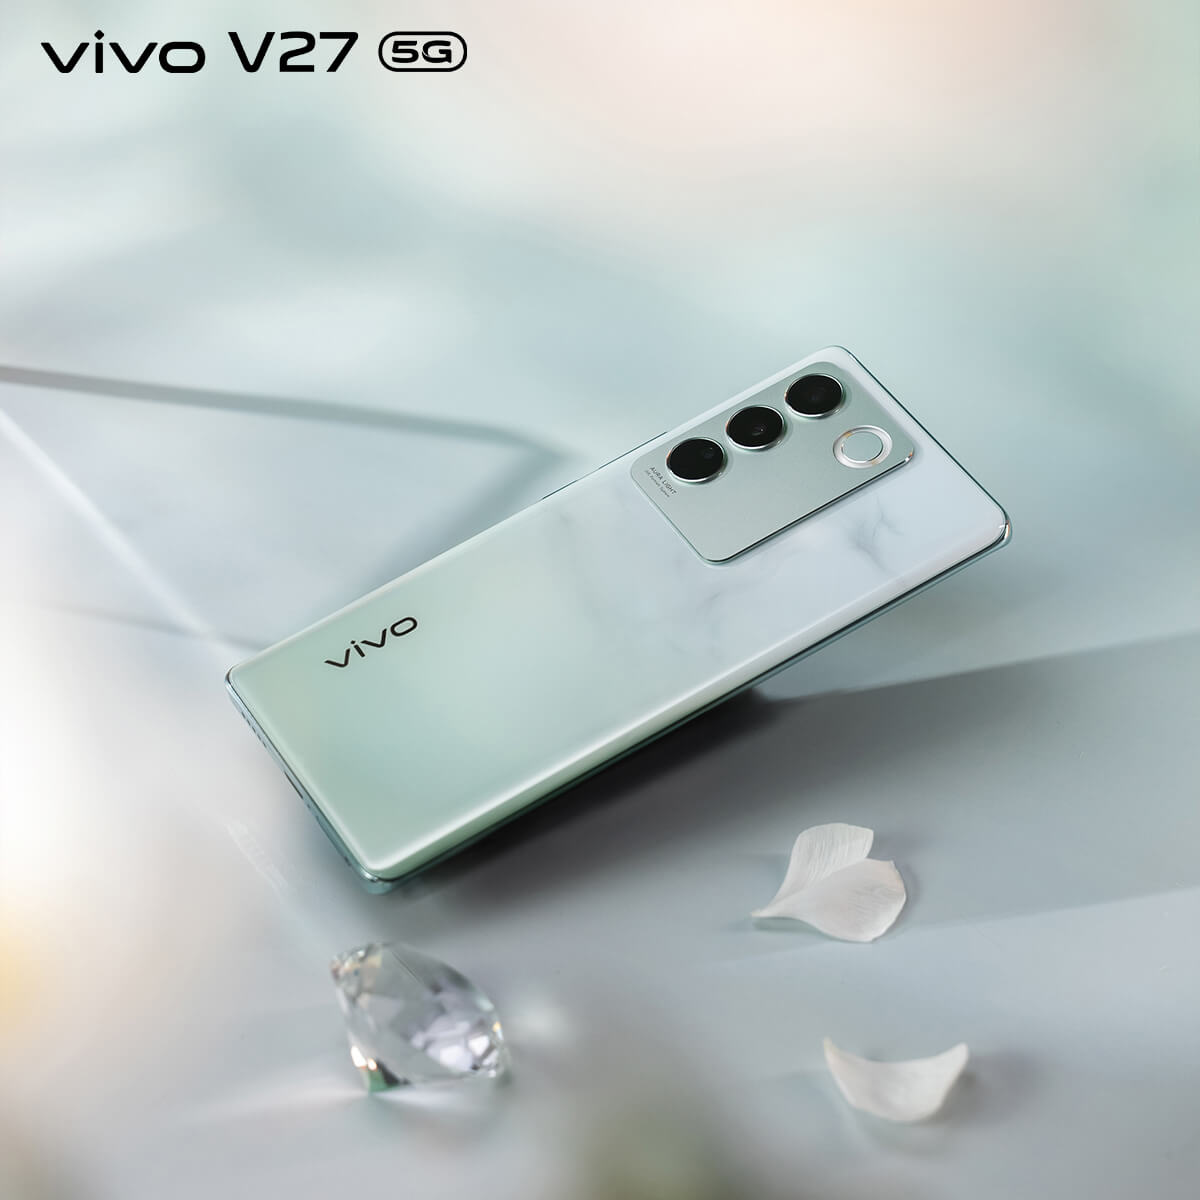 Vivo V27: The New Addition To Vivo's V Series Is Coming Soon To Malaysia